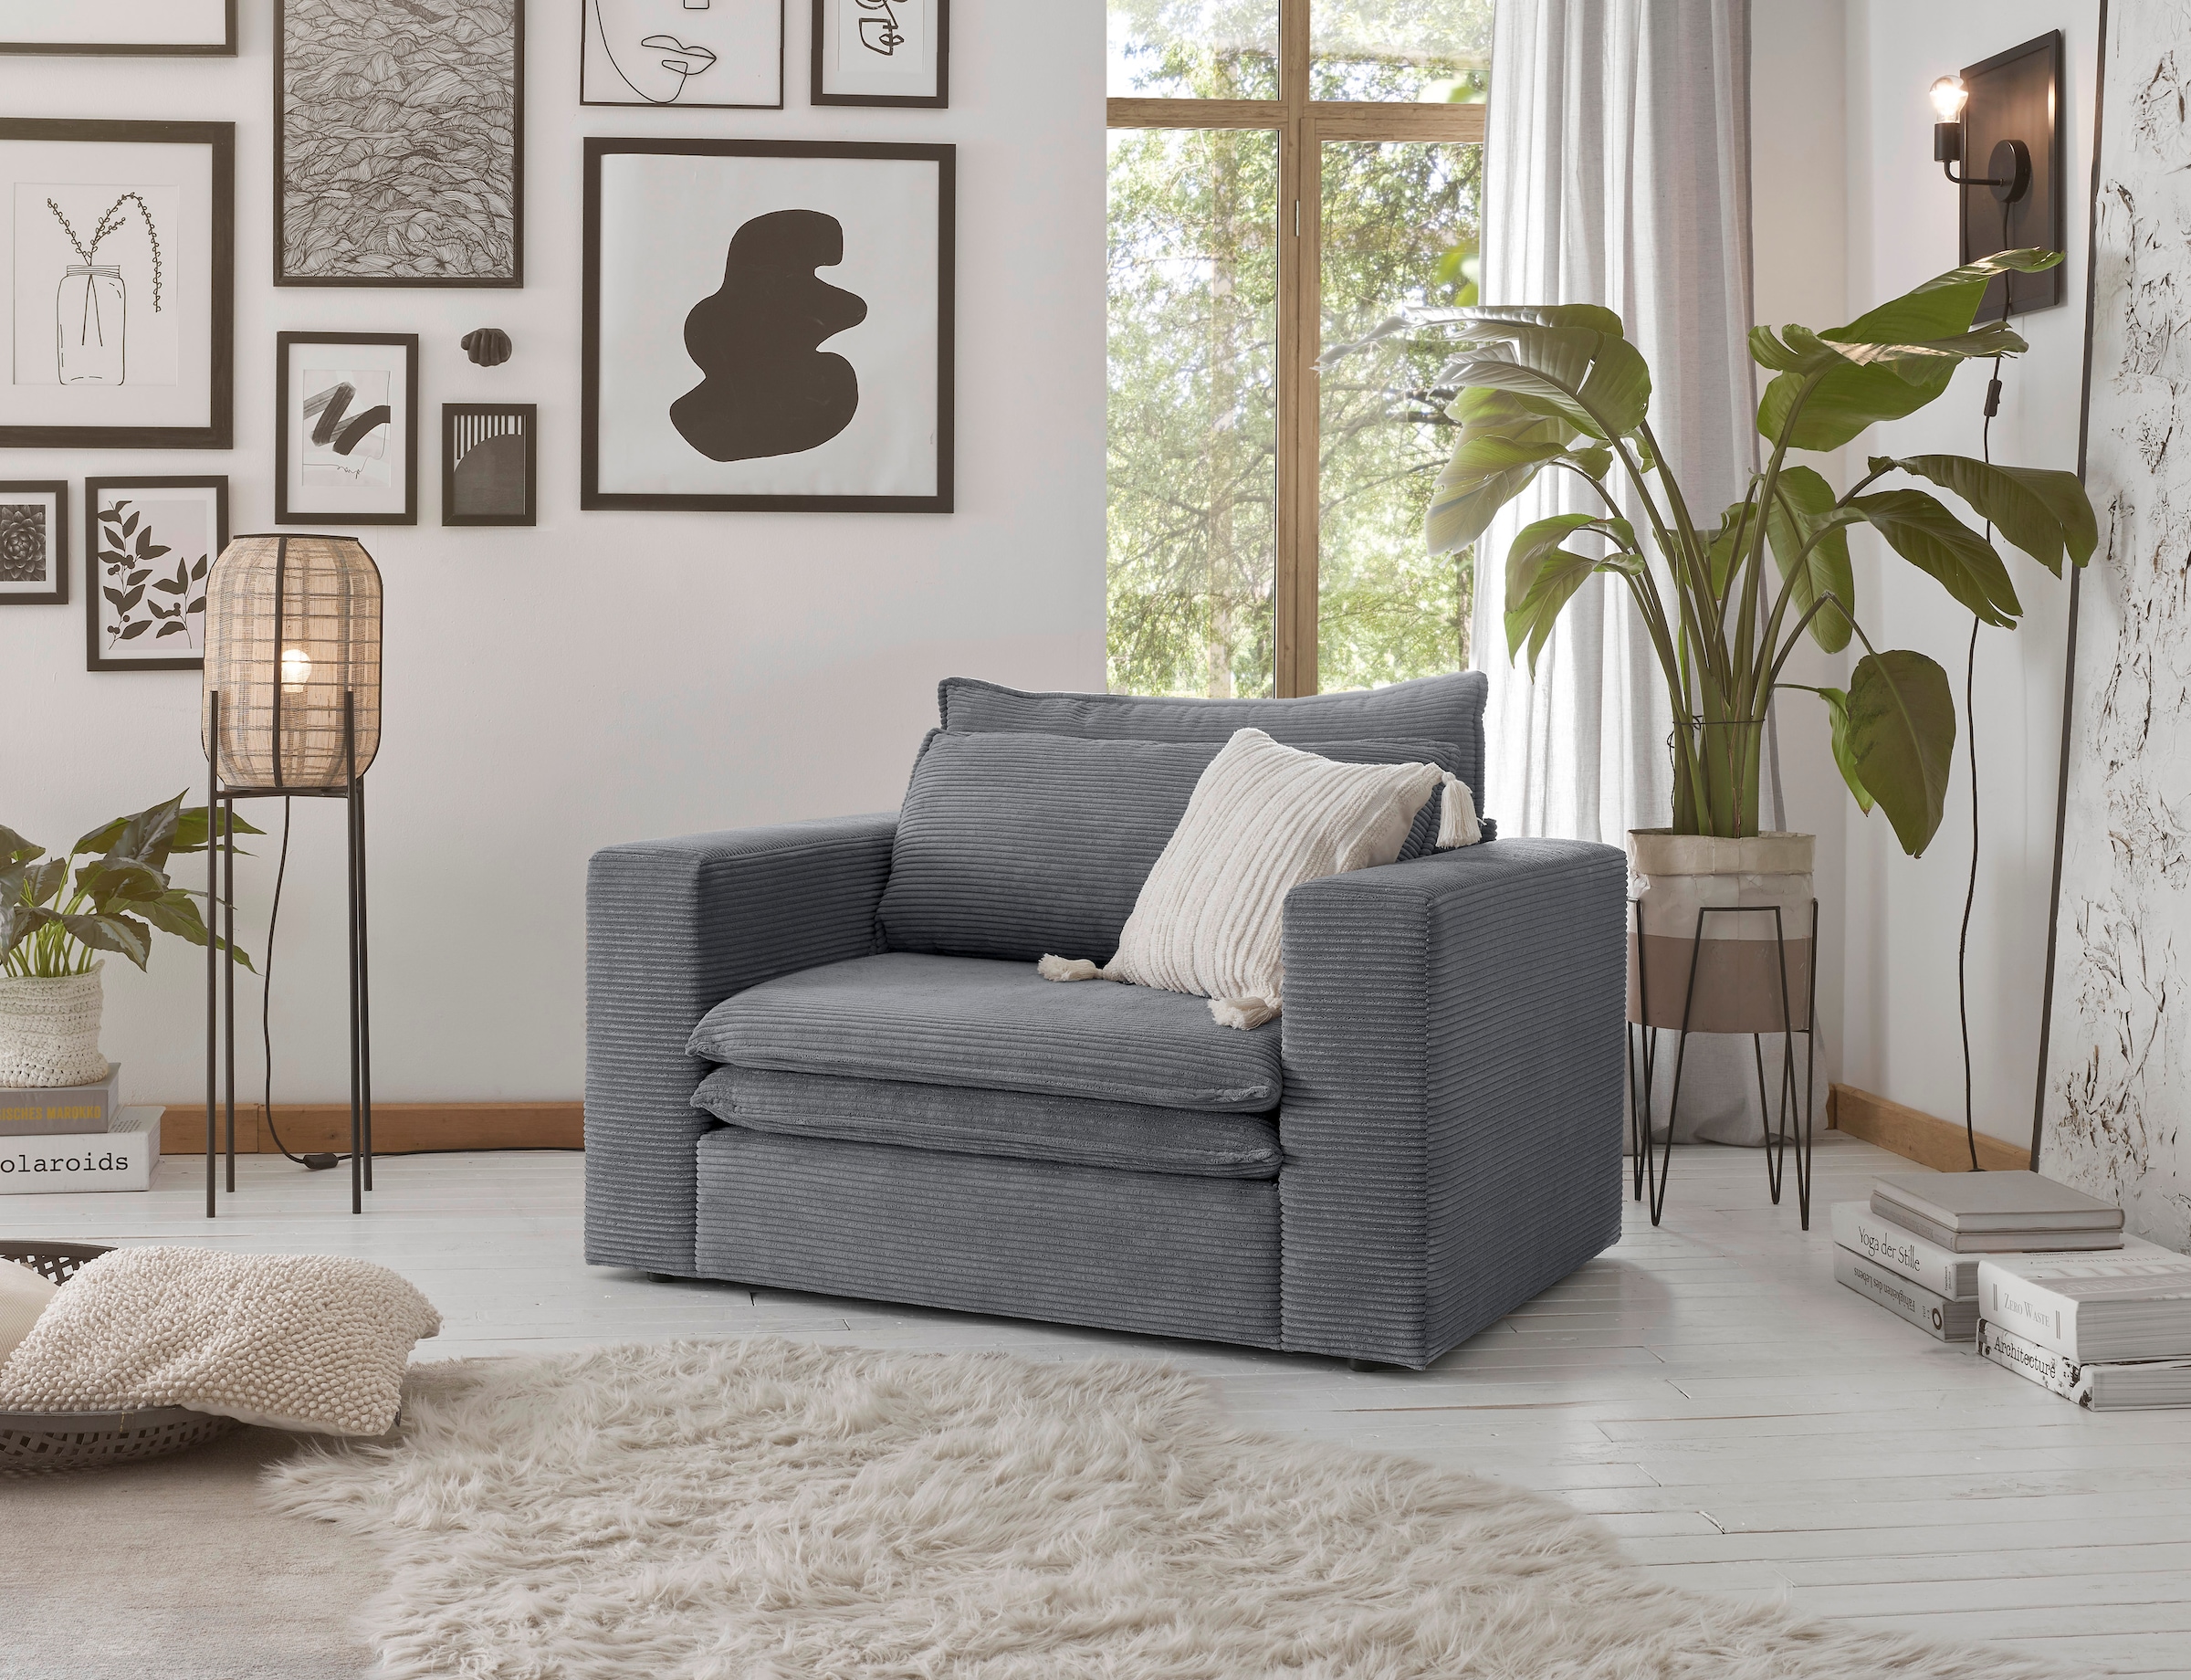 Places of »PIAGGE« kaufen BAUR | Loveseat Style